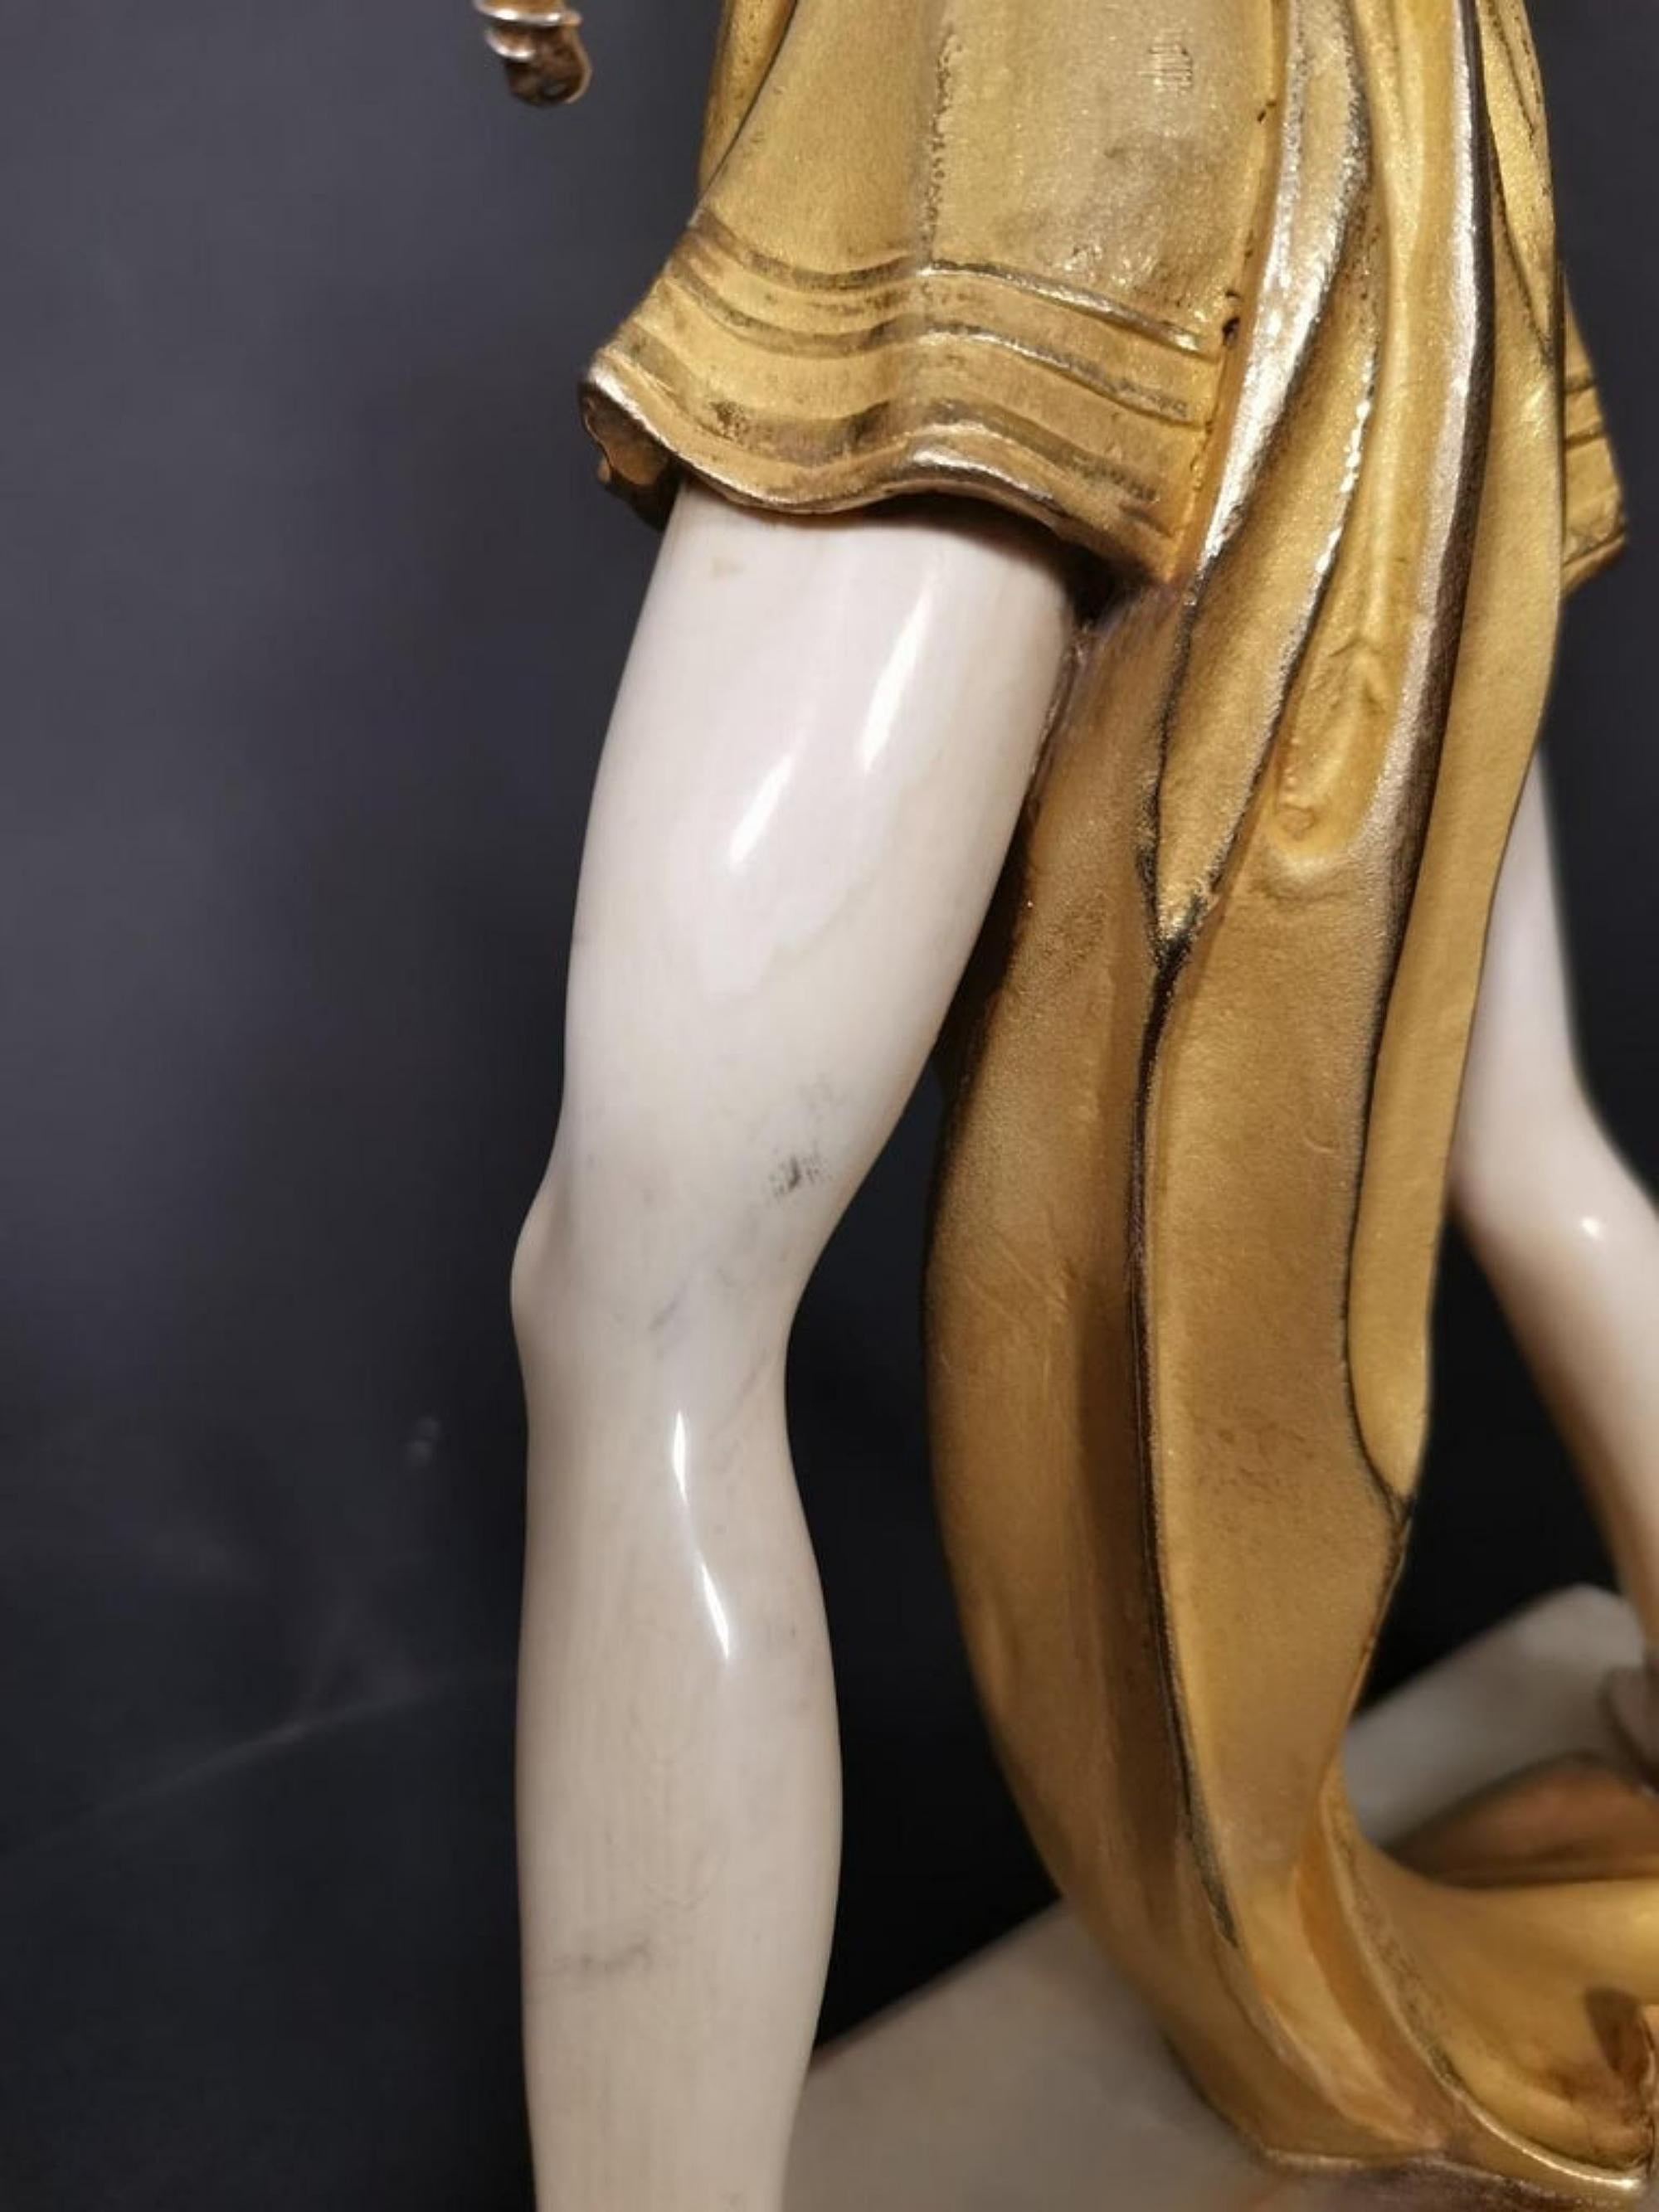 Ferdinand Preiss, Diana, 
An Art Deco figurine in gilded bronze and chryselephantine ivory,
Model 1081, around the 20th century,
Cast and modeled as an Archer in a tunic on an onyx base, mark incised at the base f preiss,
Measure: 35cm